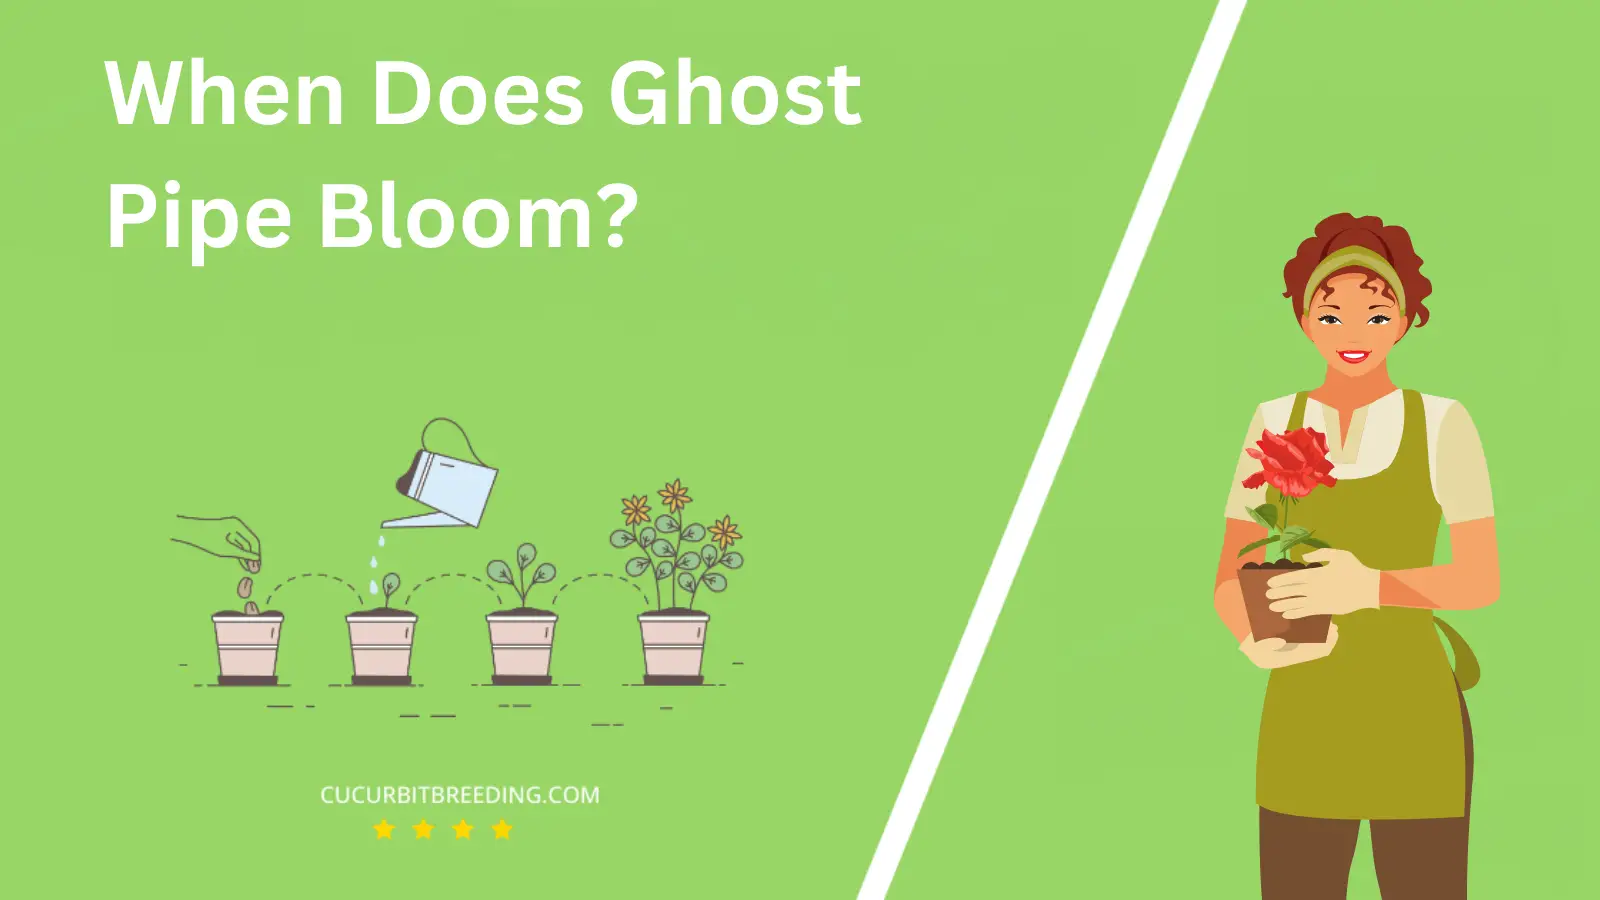 When Does Ghost Pipe Bloom?